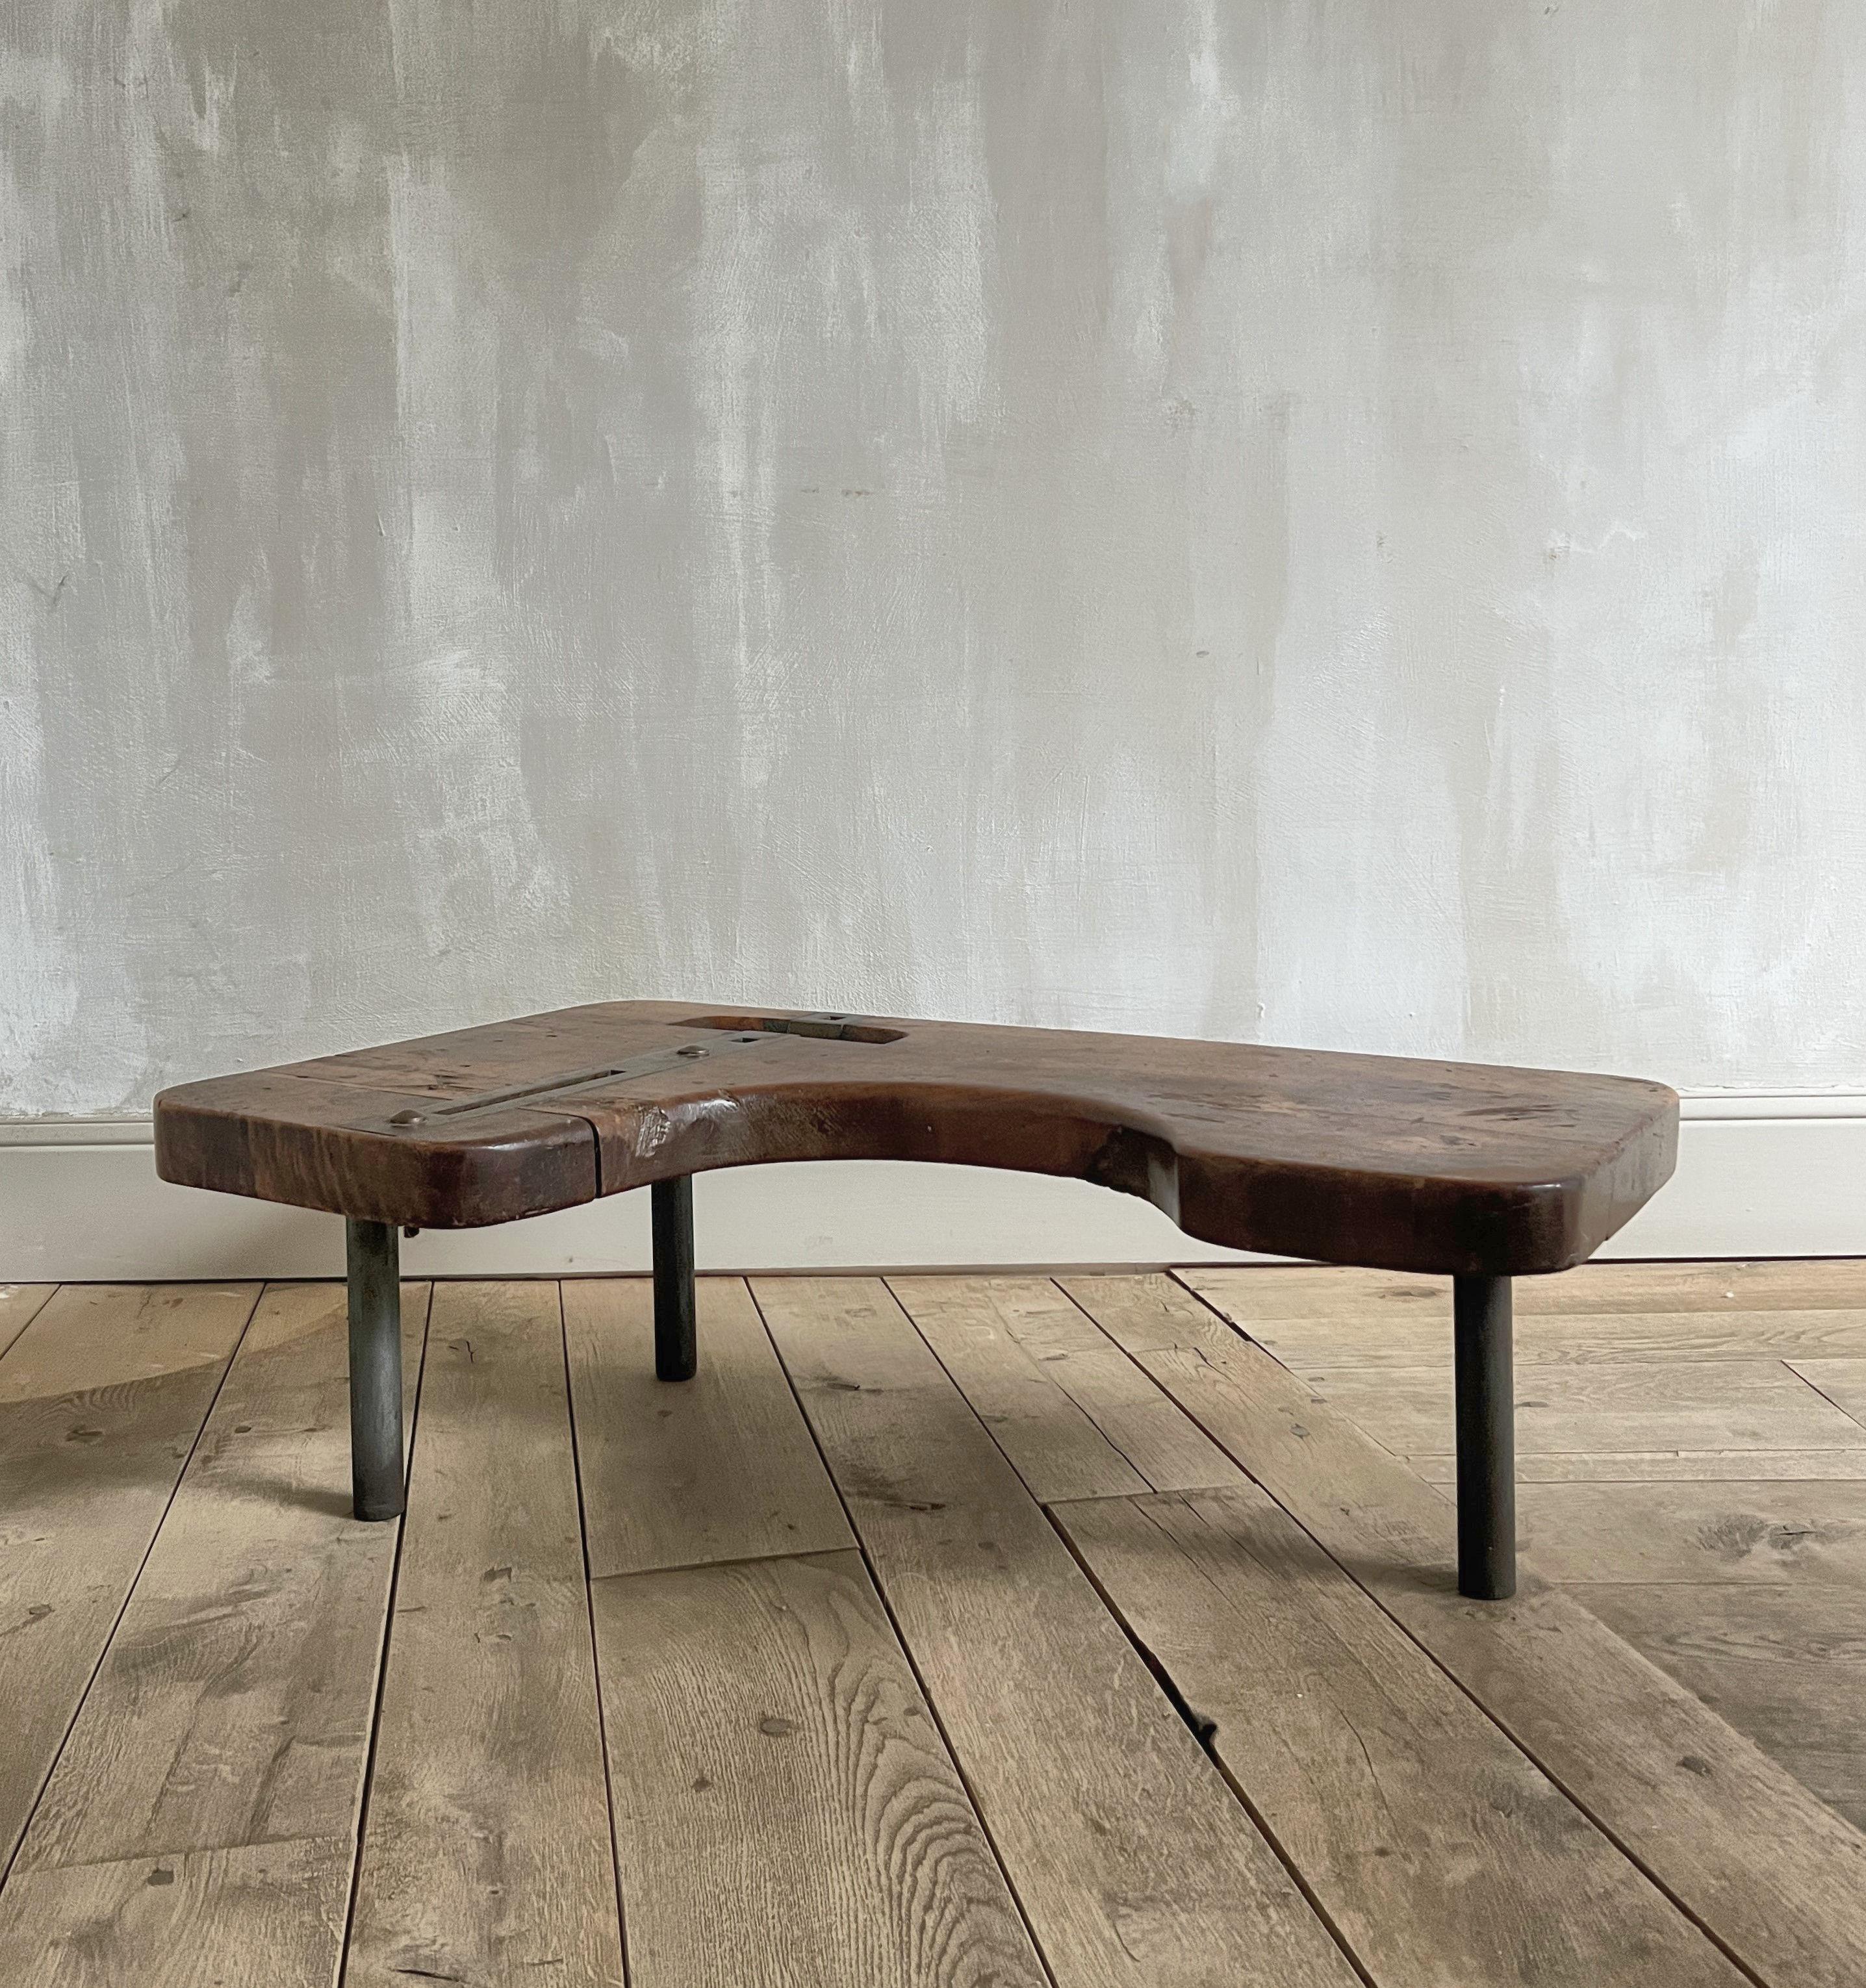 We made this table from a late 18th centuyr cobblers table. While the feet were recycled for a large coffeetable we reclaimed the top for use as a side- and or coffeetable. We also made a marbleplaster coffeetable which locks in to the smaller one